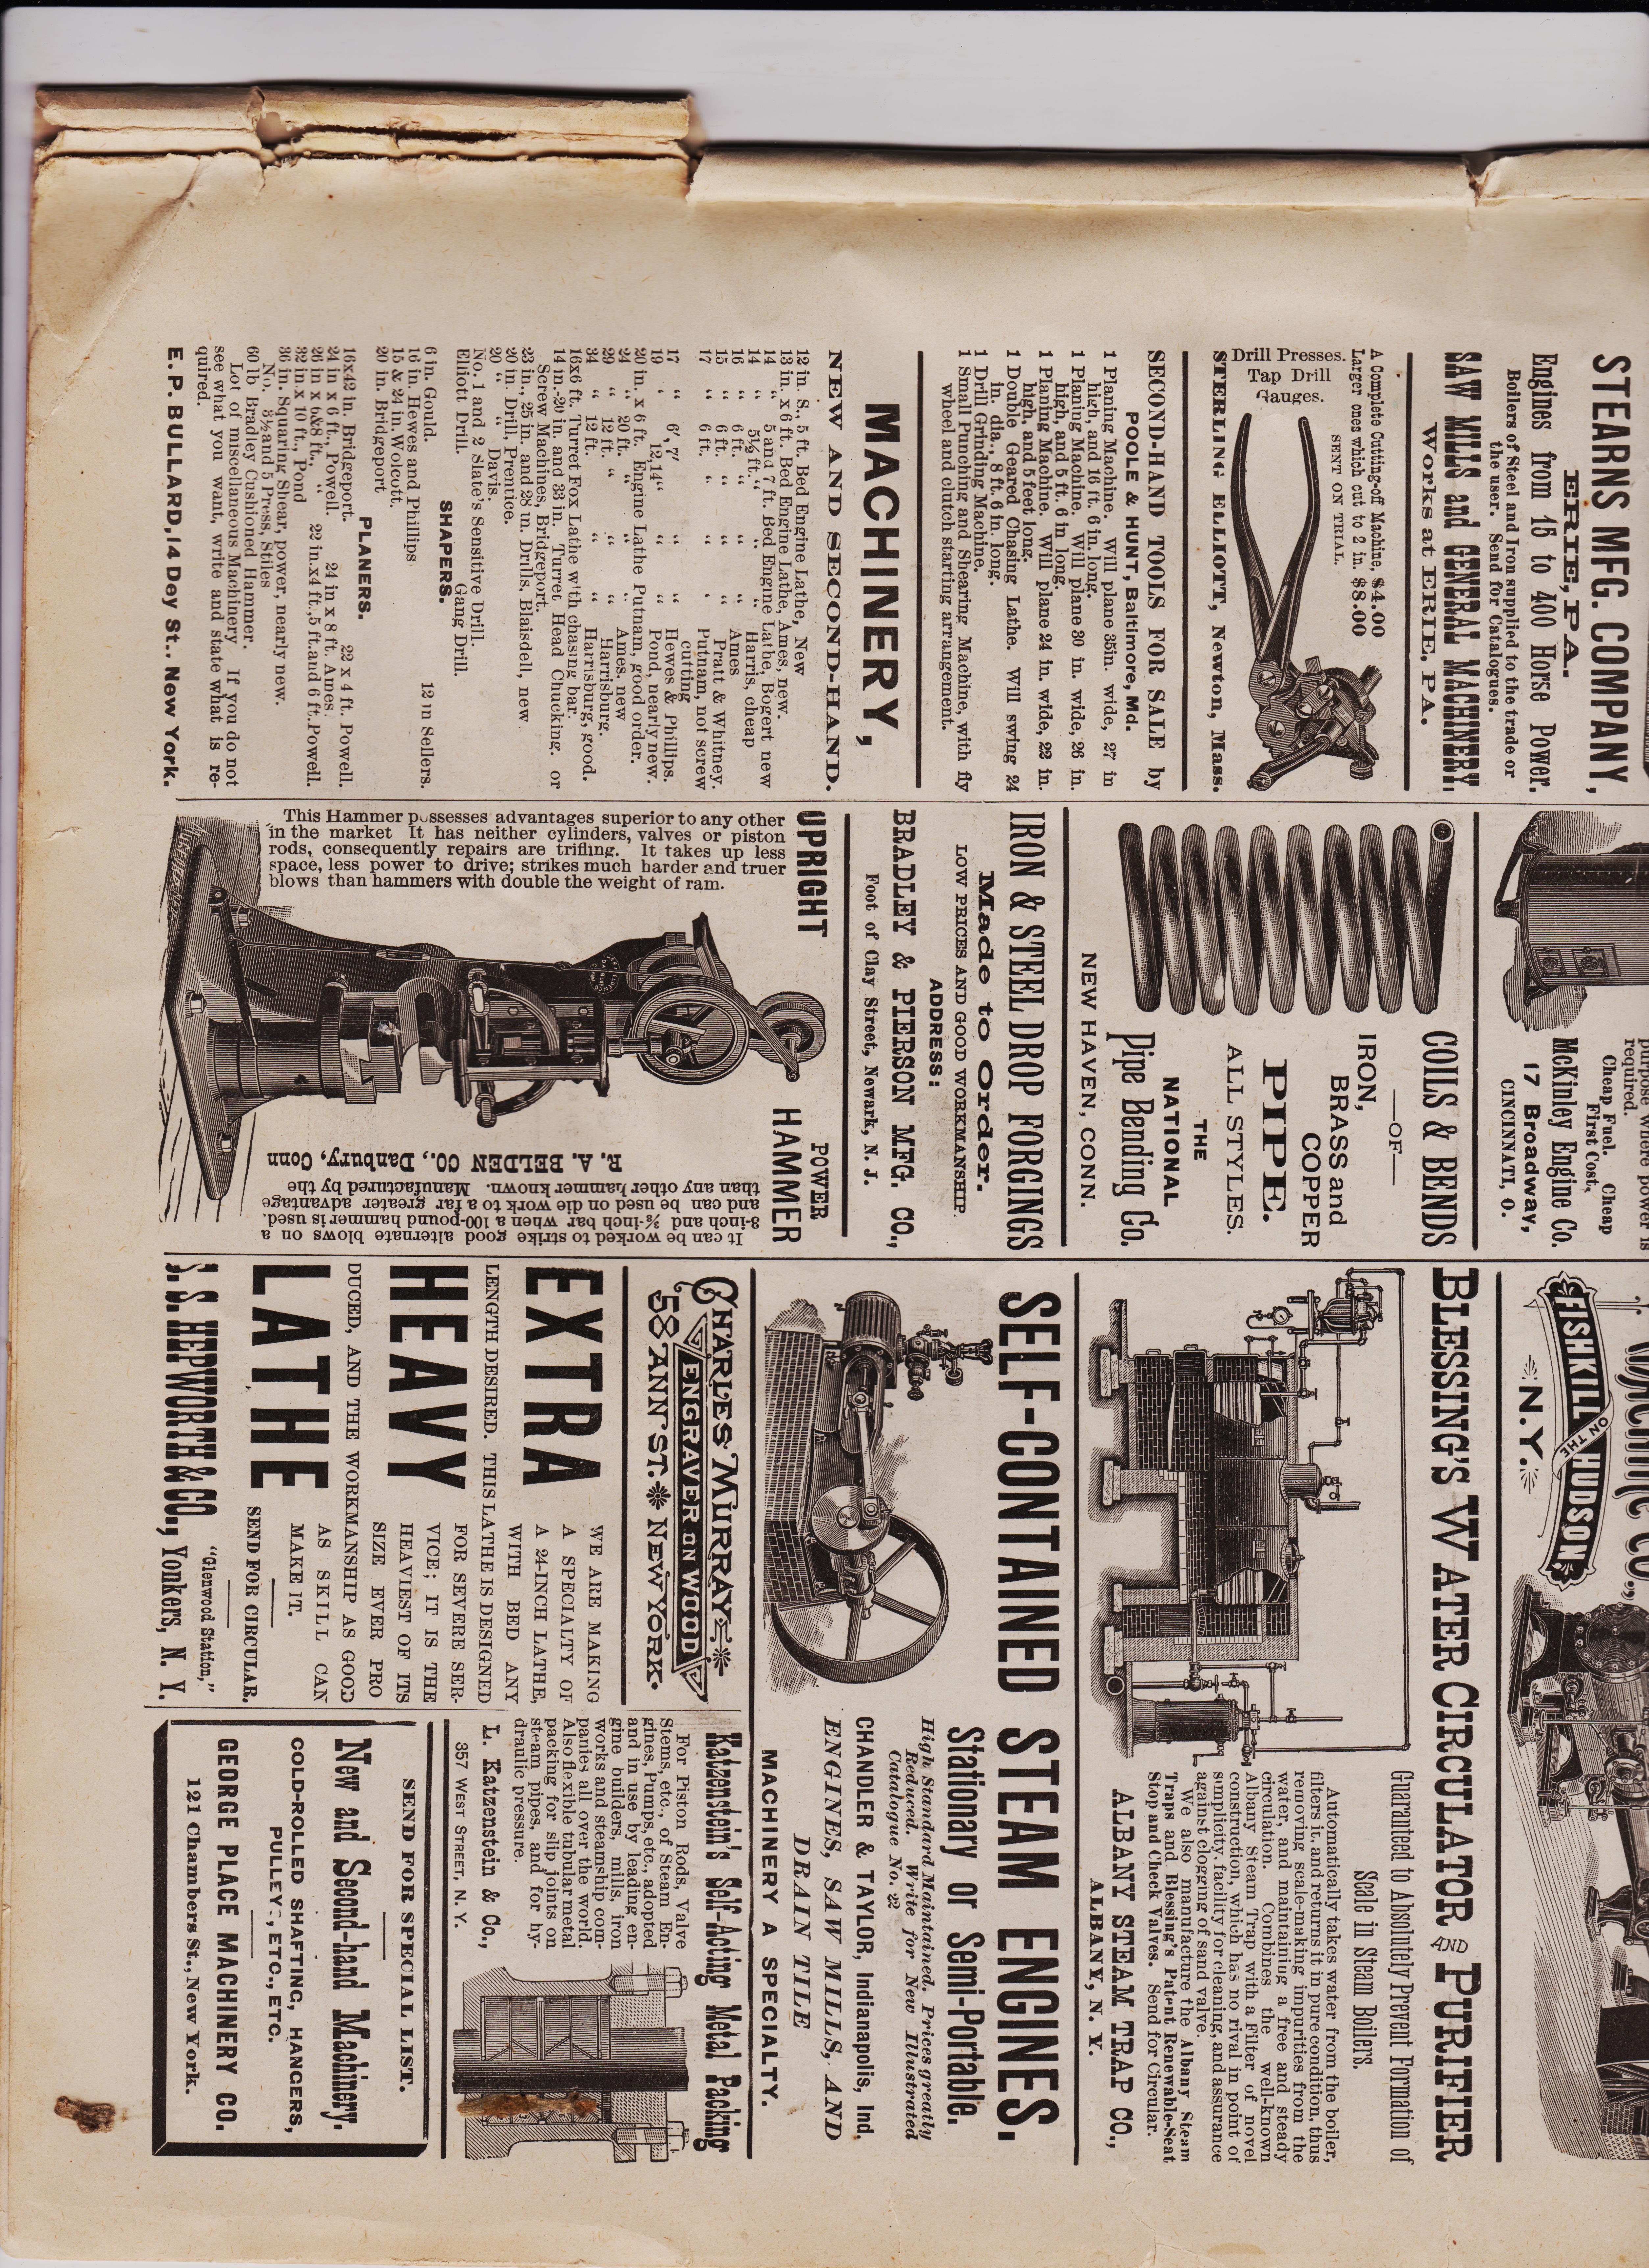 https://antiquemachinery.com/images-American-Machinist-Jan-22-1887/American-Machinist-Jan-15-1887-p-15-bot.jpeg 